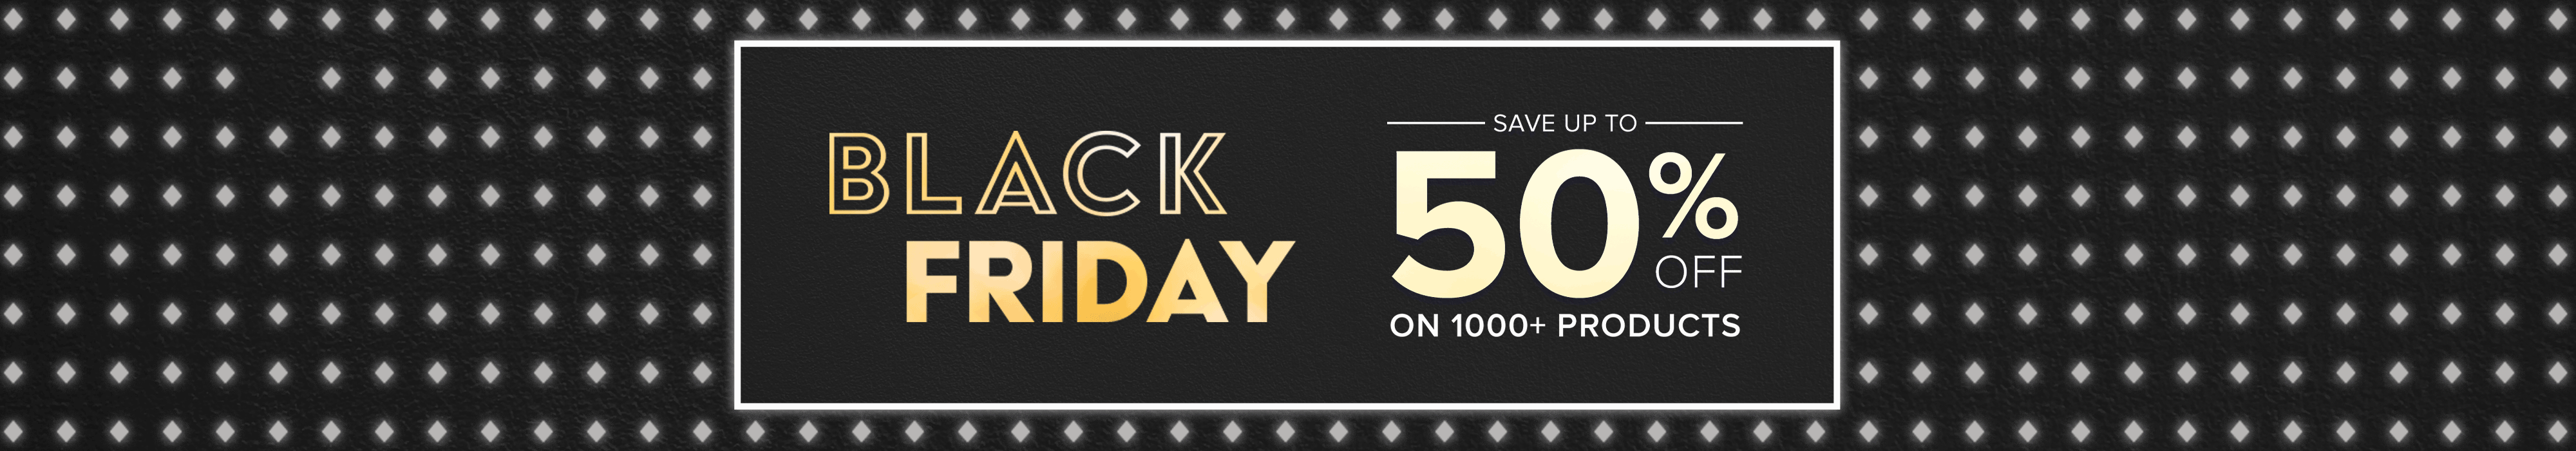 Black Friday - Save up to 50% on 1000+ Products